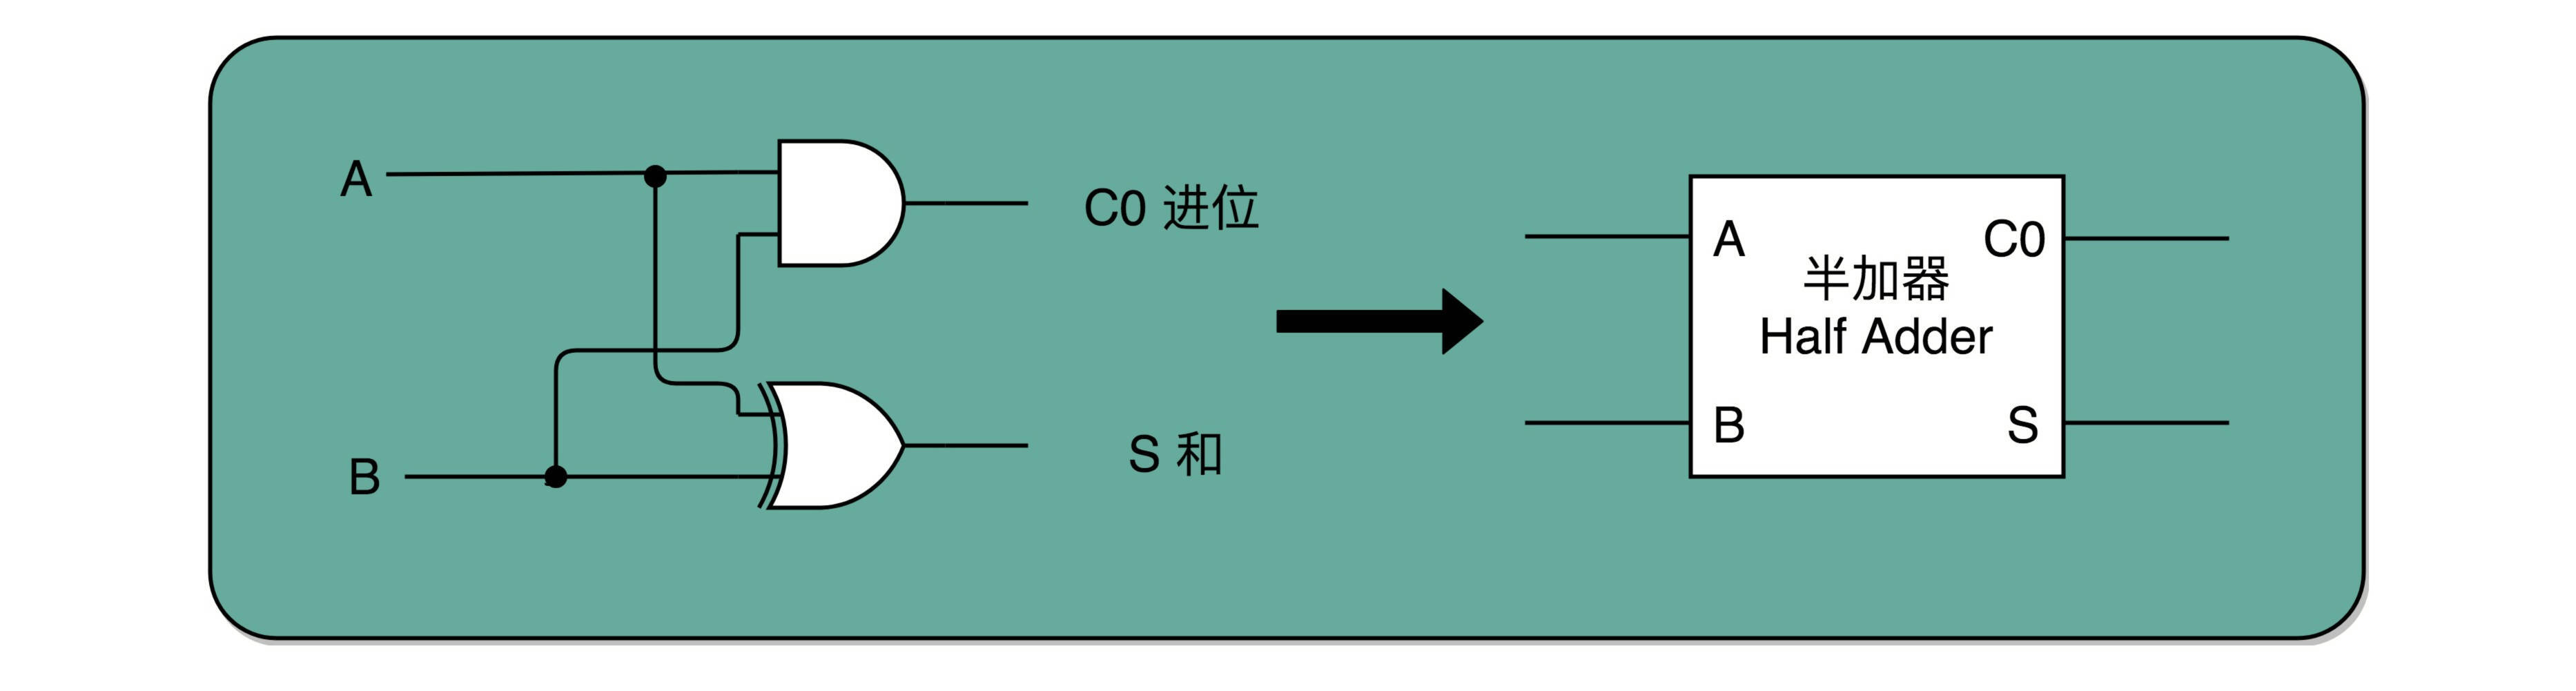 https://img.zhaoweiguo.com/knowledge/images/cores/composition-principles/adder1.jpeg